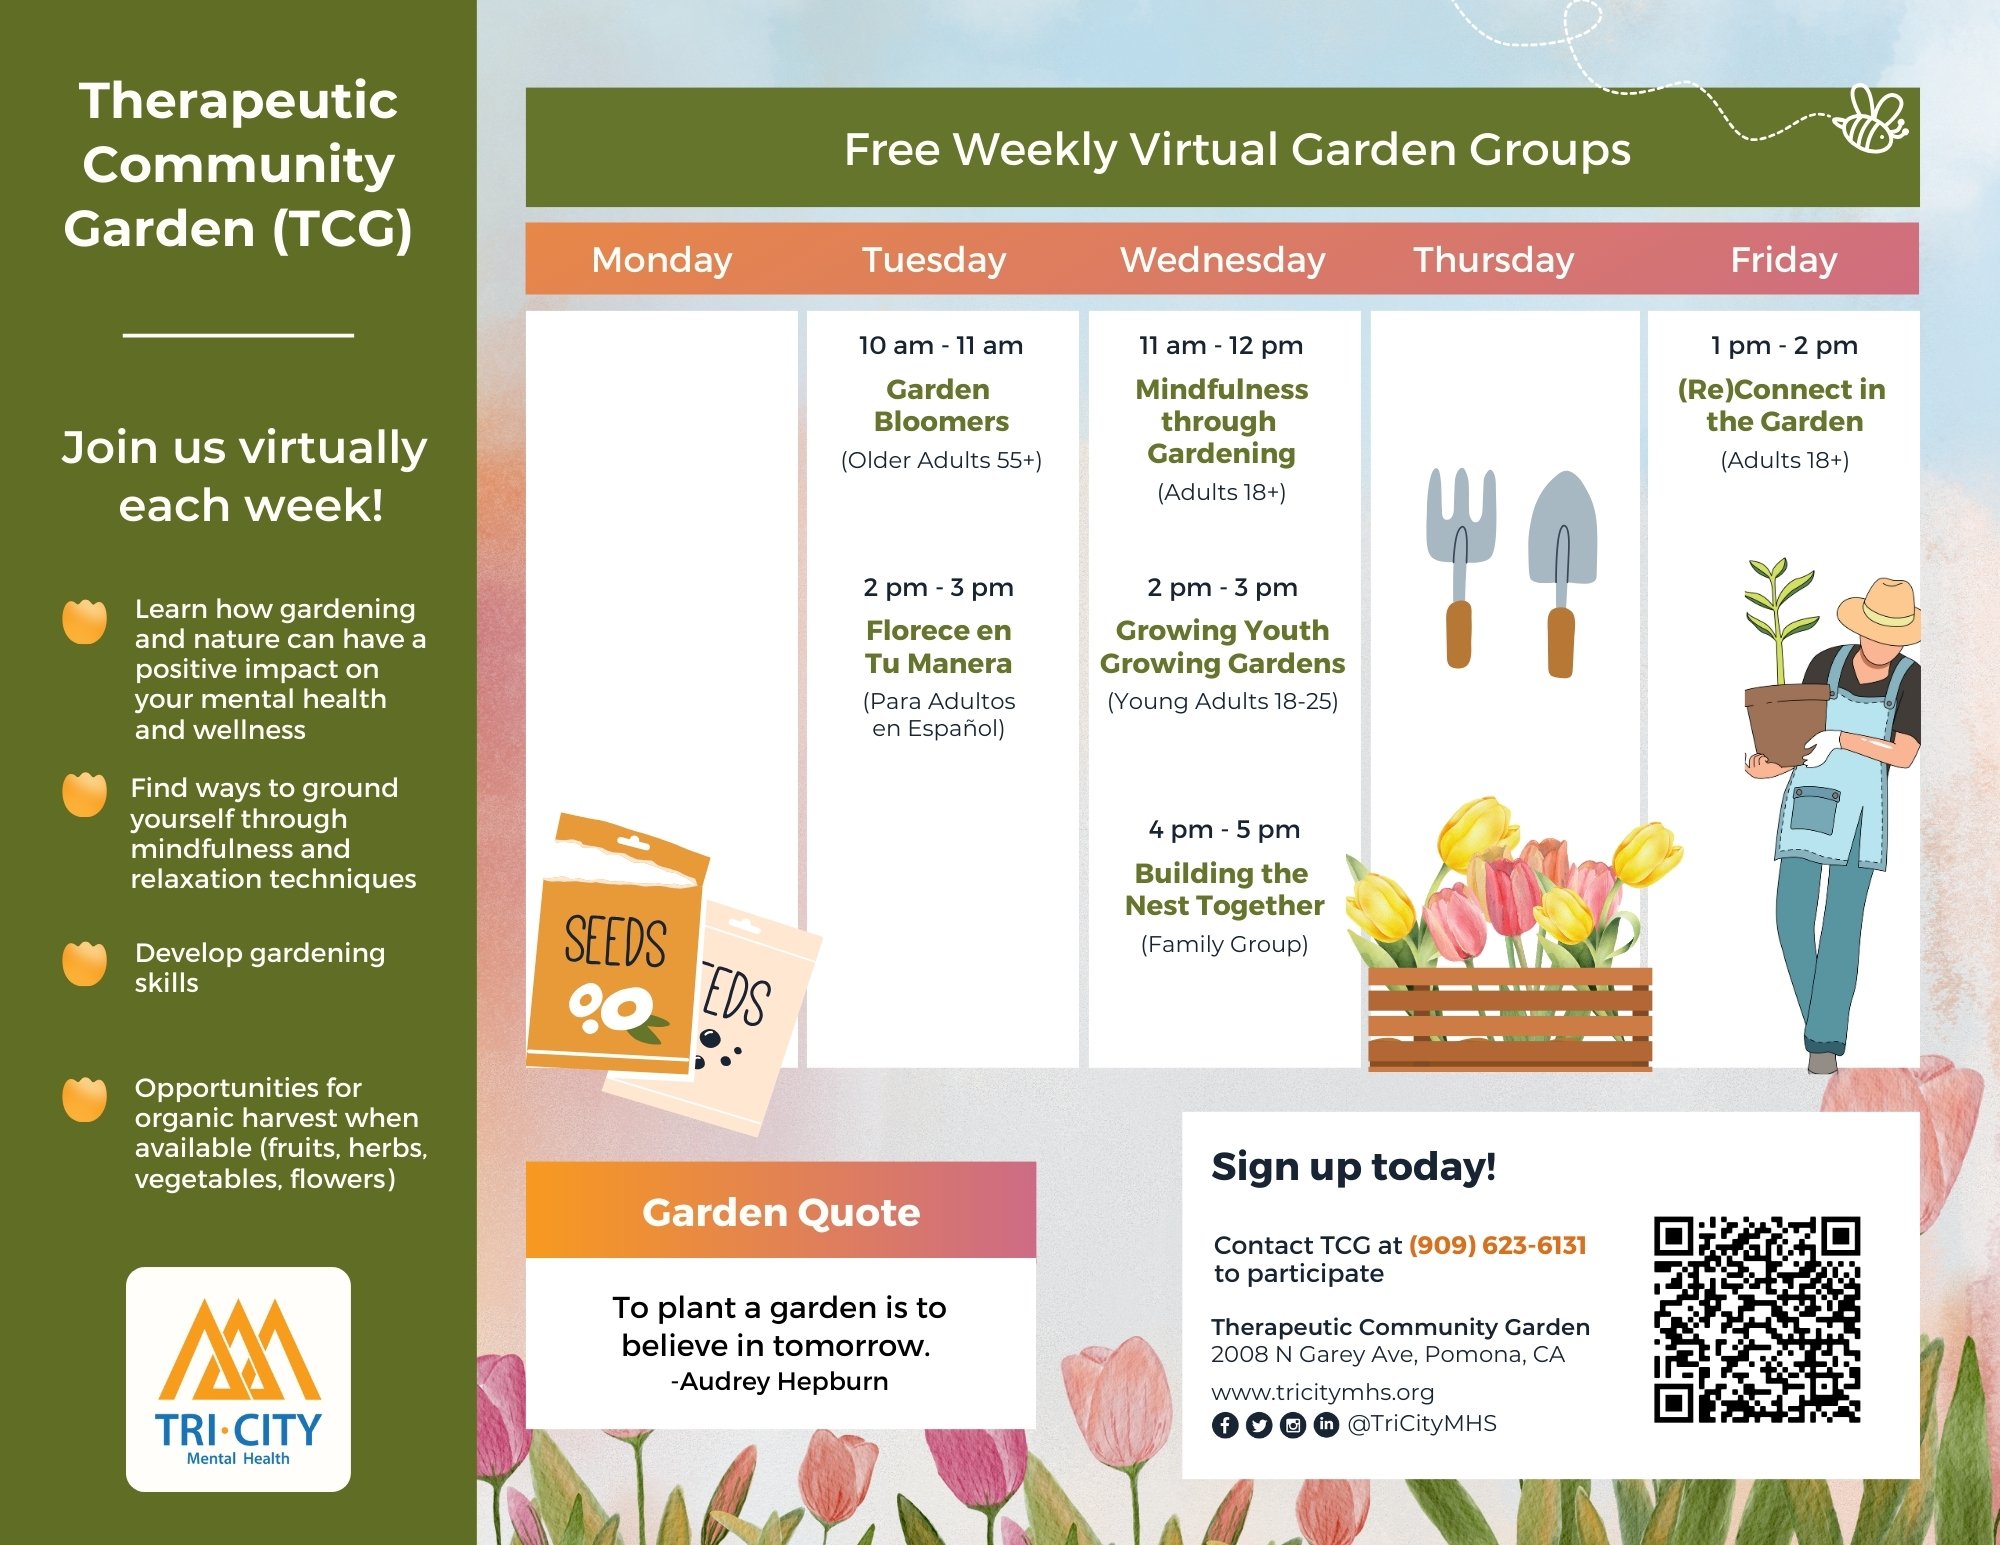 Download the TCG Virtual Group Calendar in PDF format